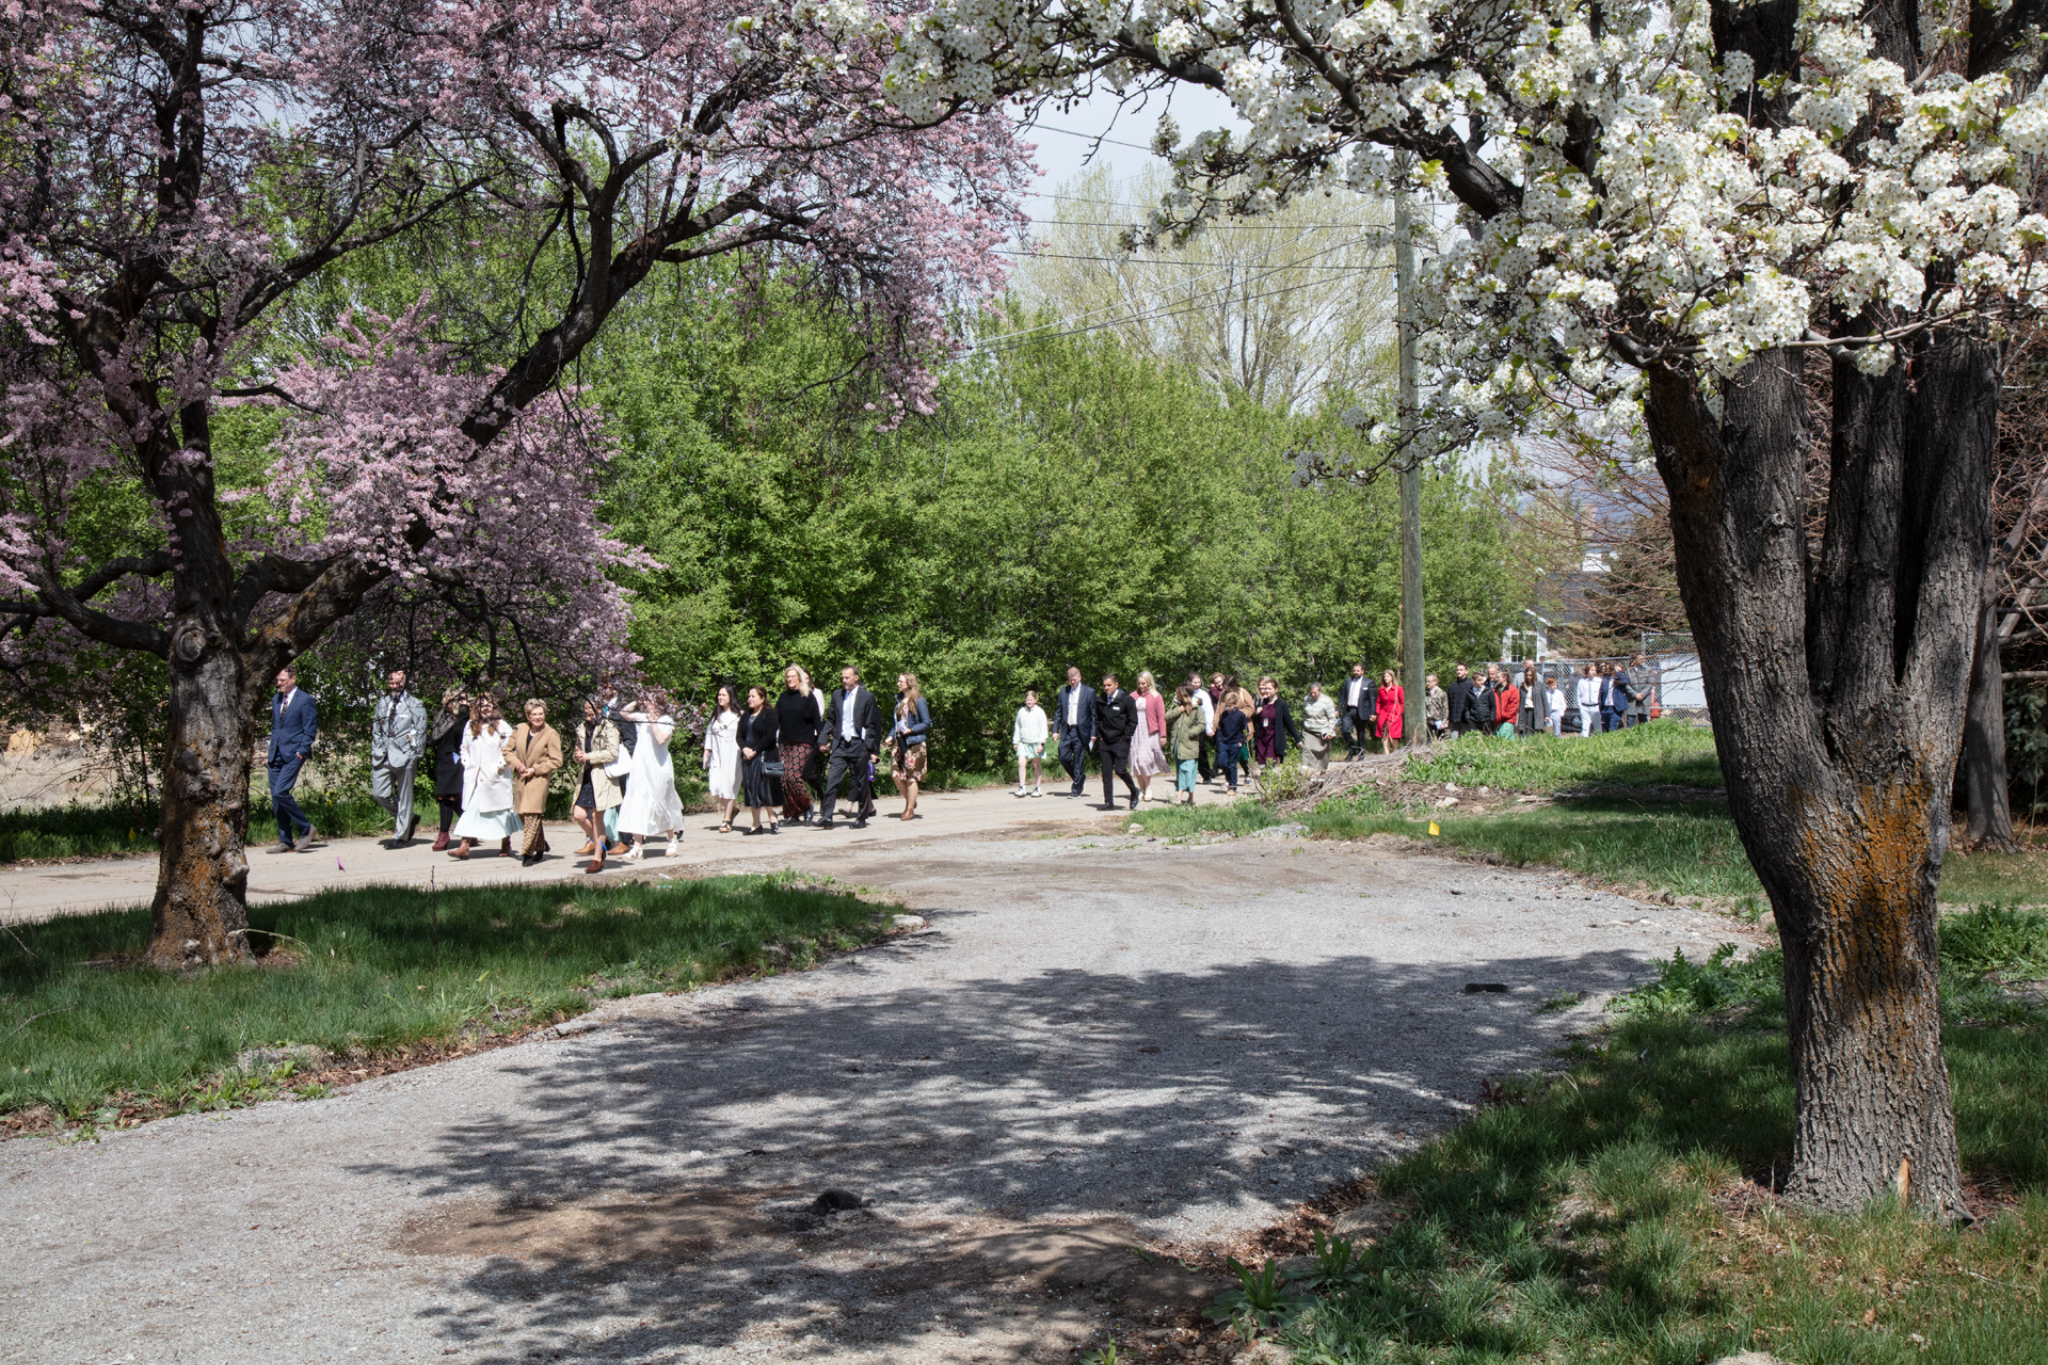 A group of people in Sunday best walking on a dirt path, with trees and grass around them.